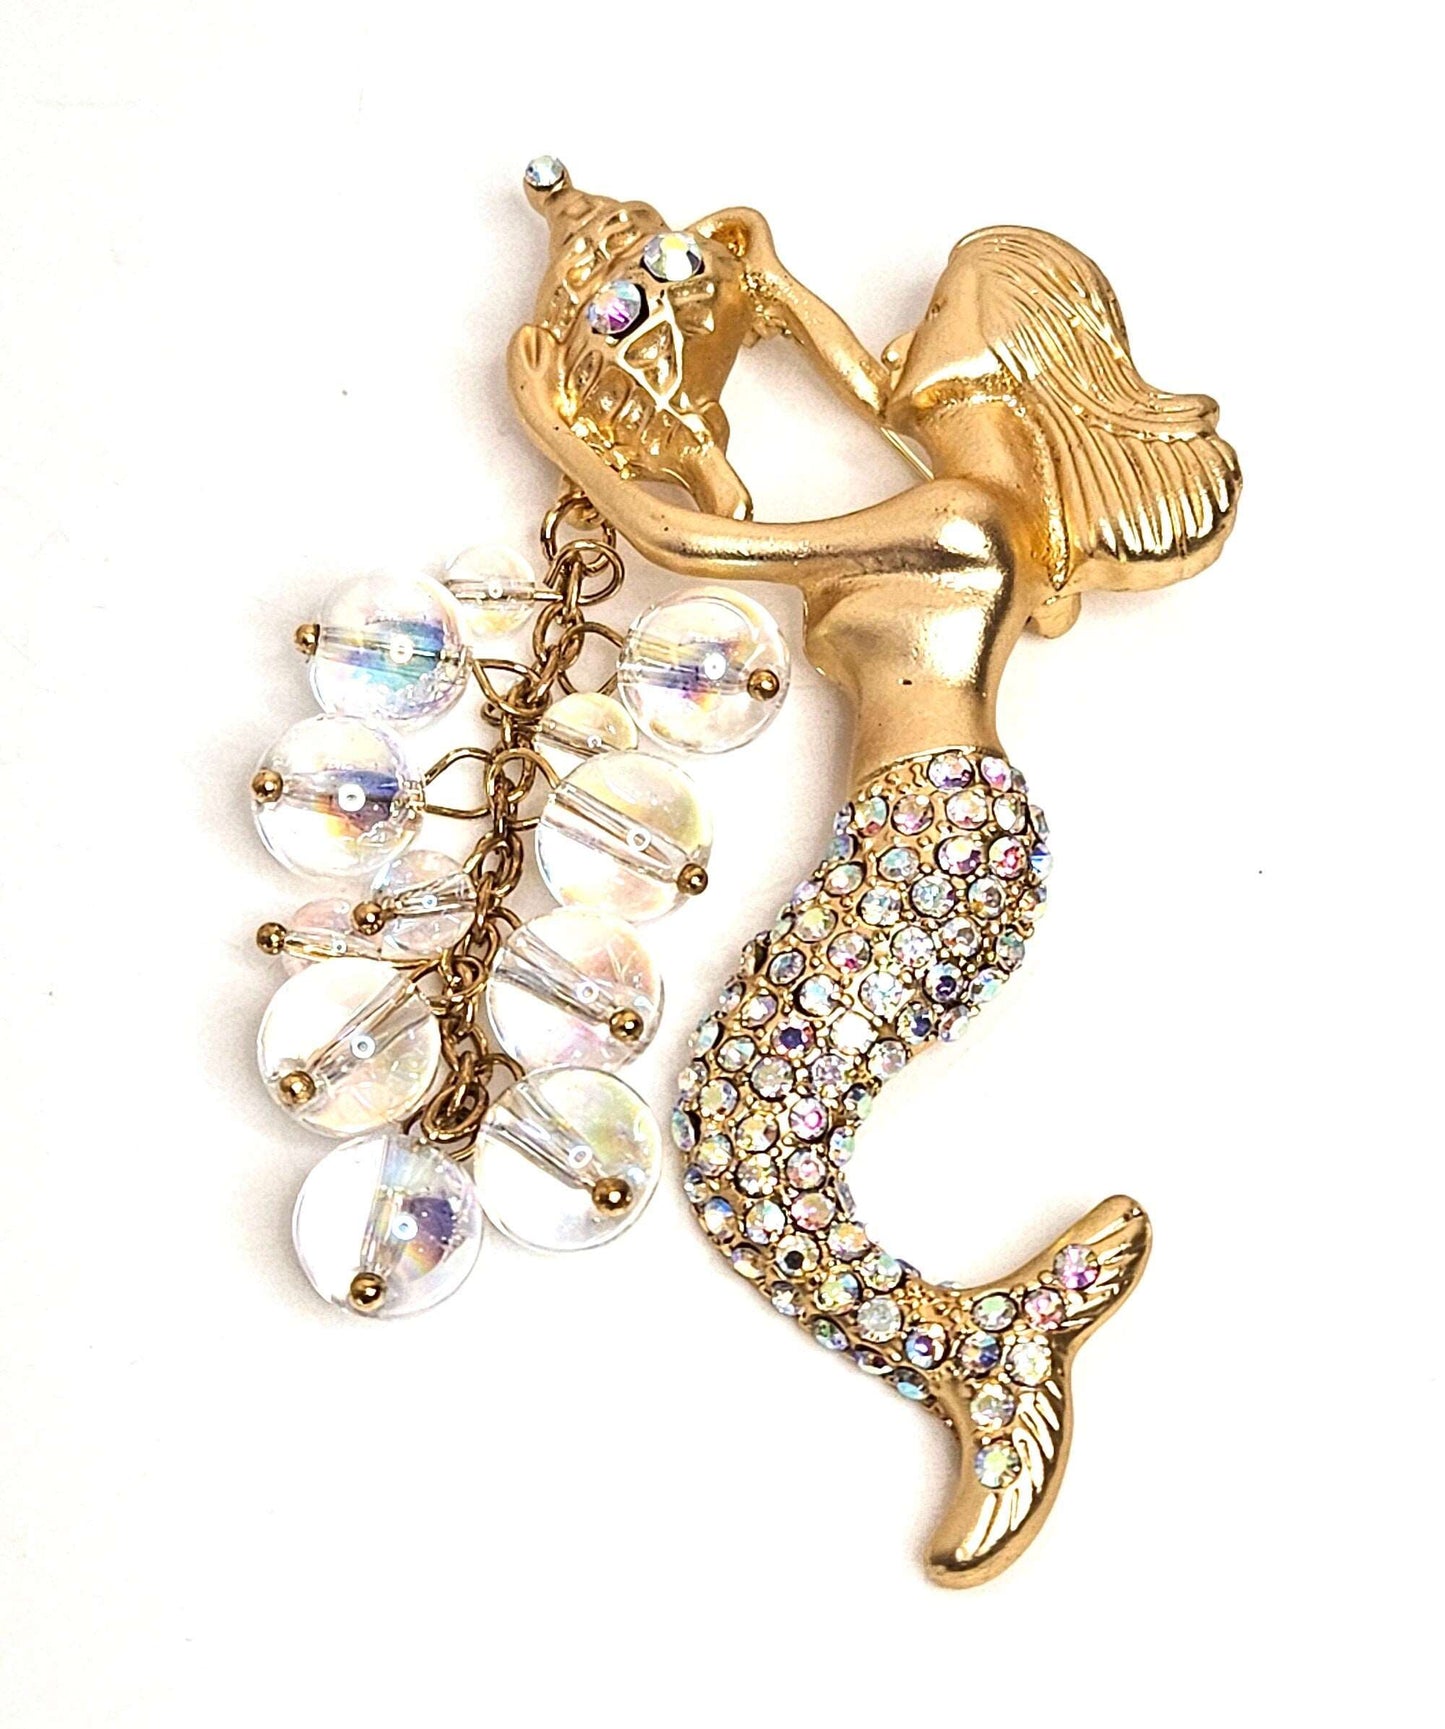 Large Beautiful Gold Mermaid Brooch, Gift for Fantasy Lovers, Mermaid with a Conch Pin, Crystal Jewelry, Brooches For Women